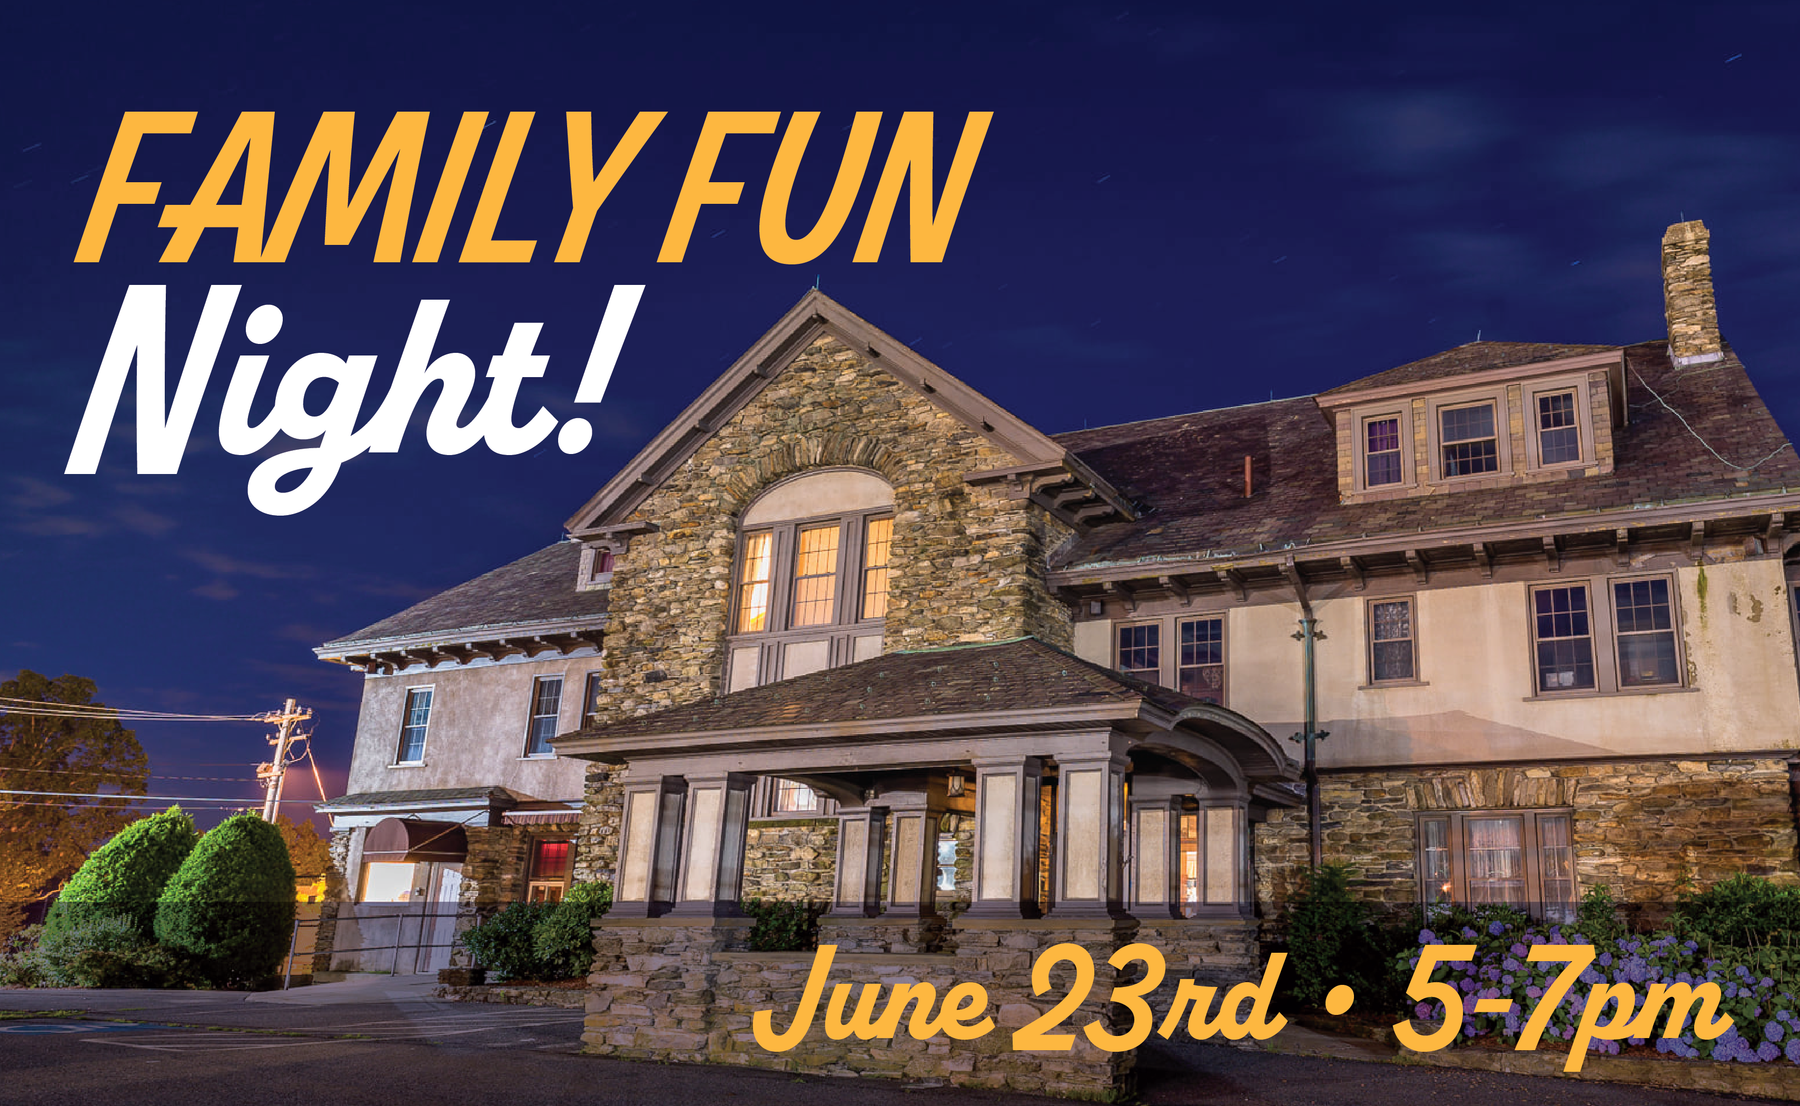 Free Family Fun Night at The Candy Mansion!